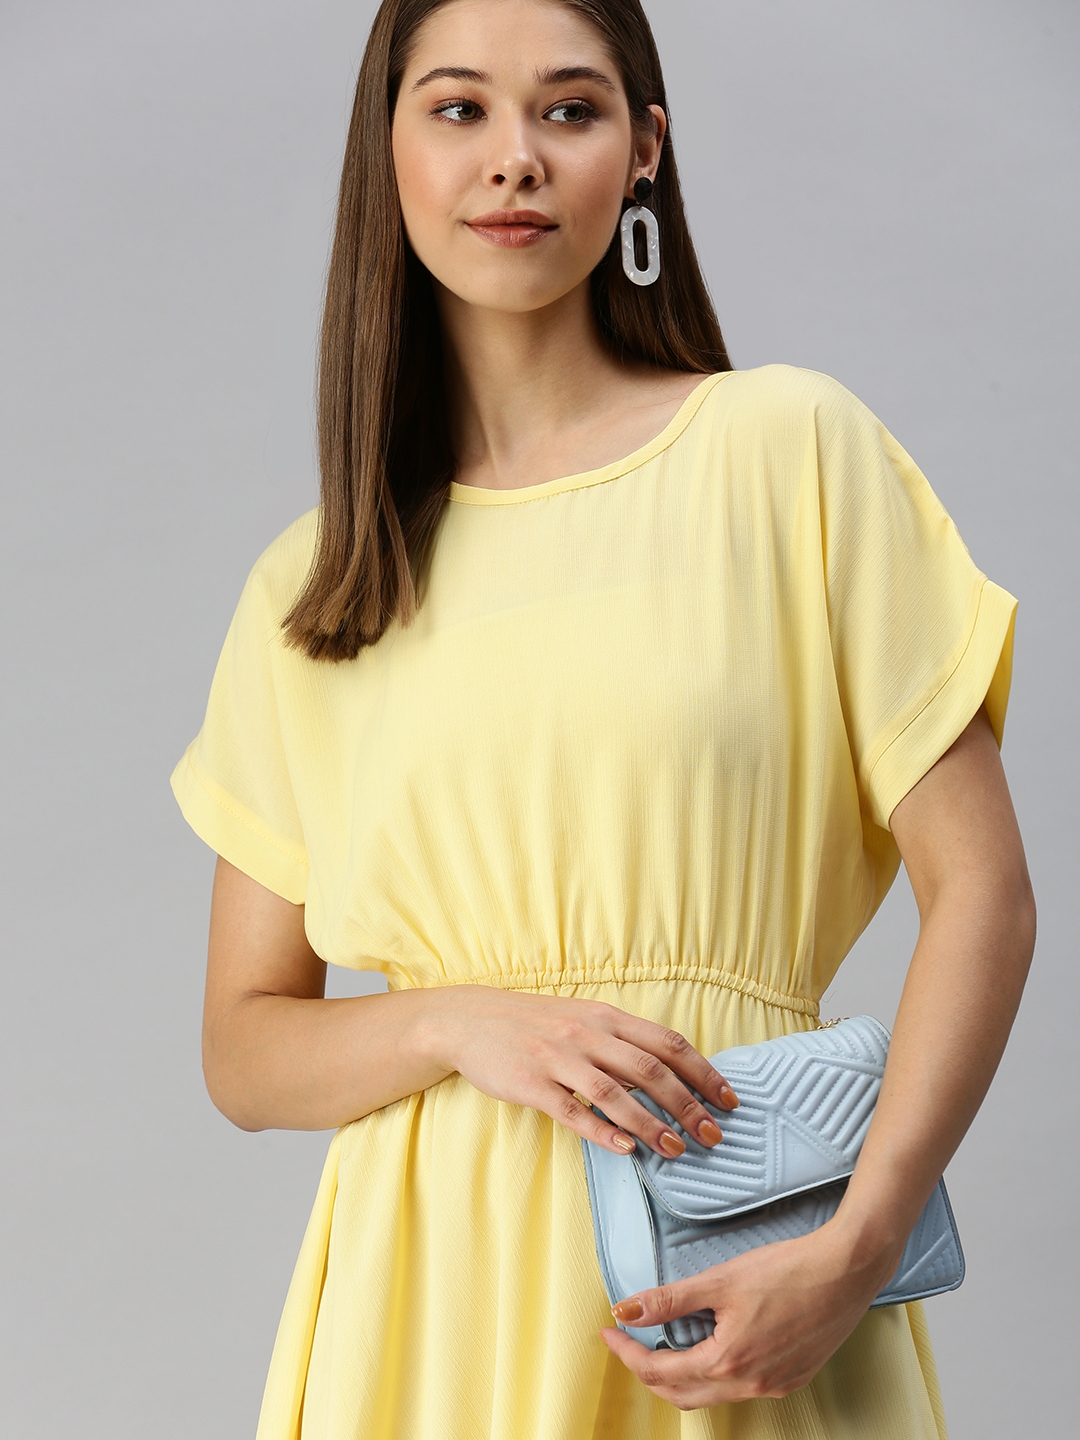 Women's Yellow Polyester Solid Dresses